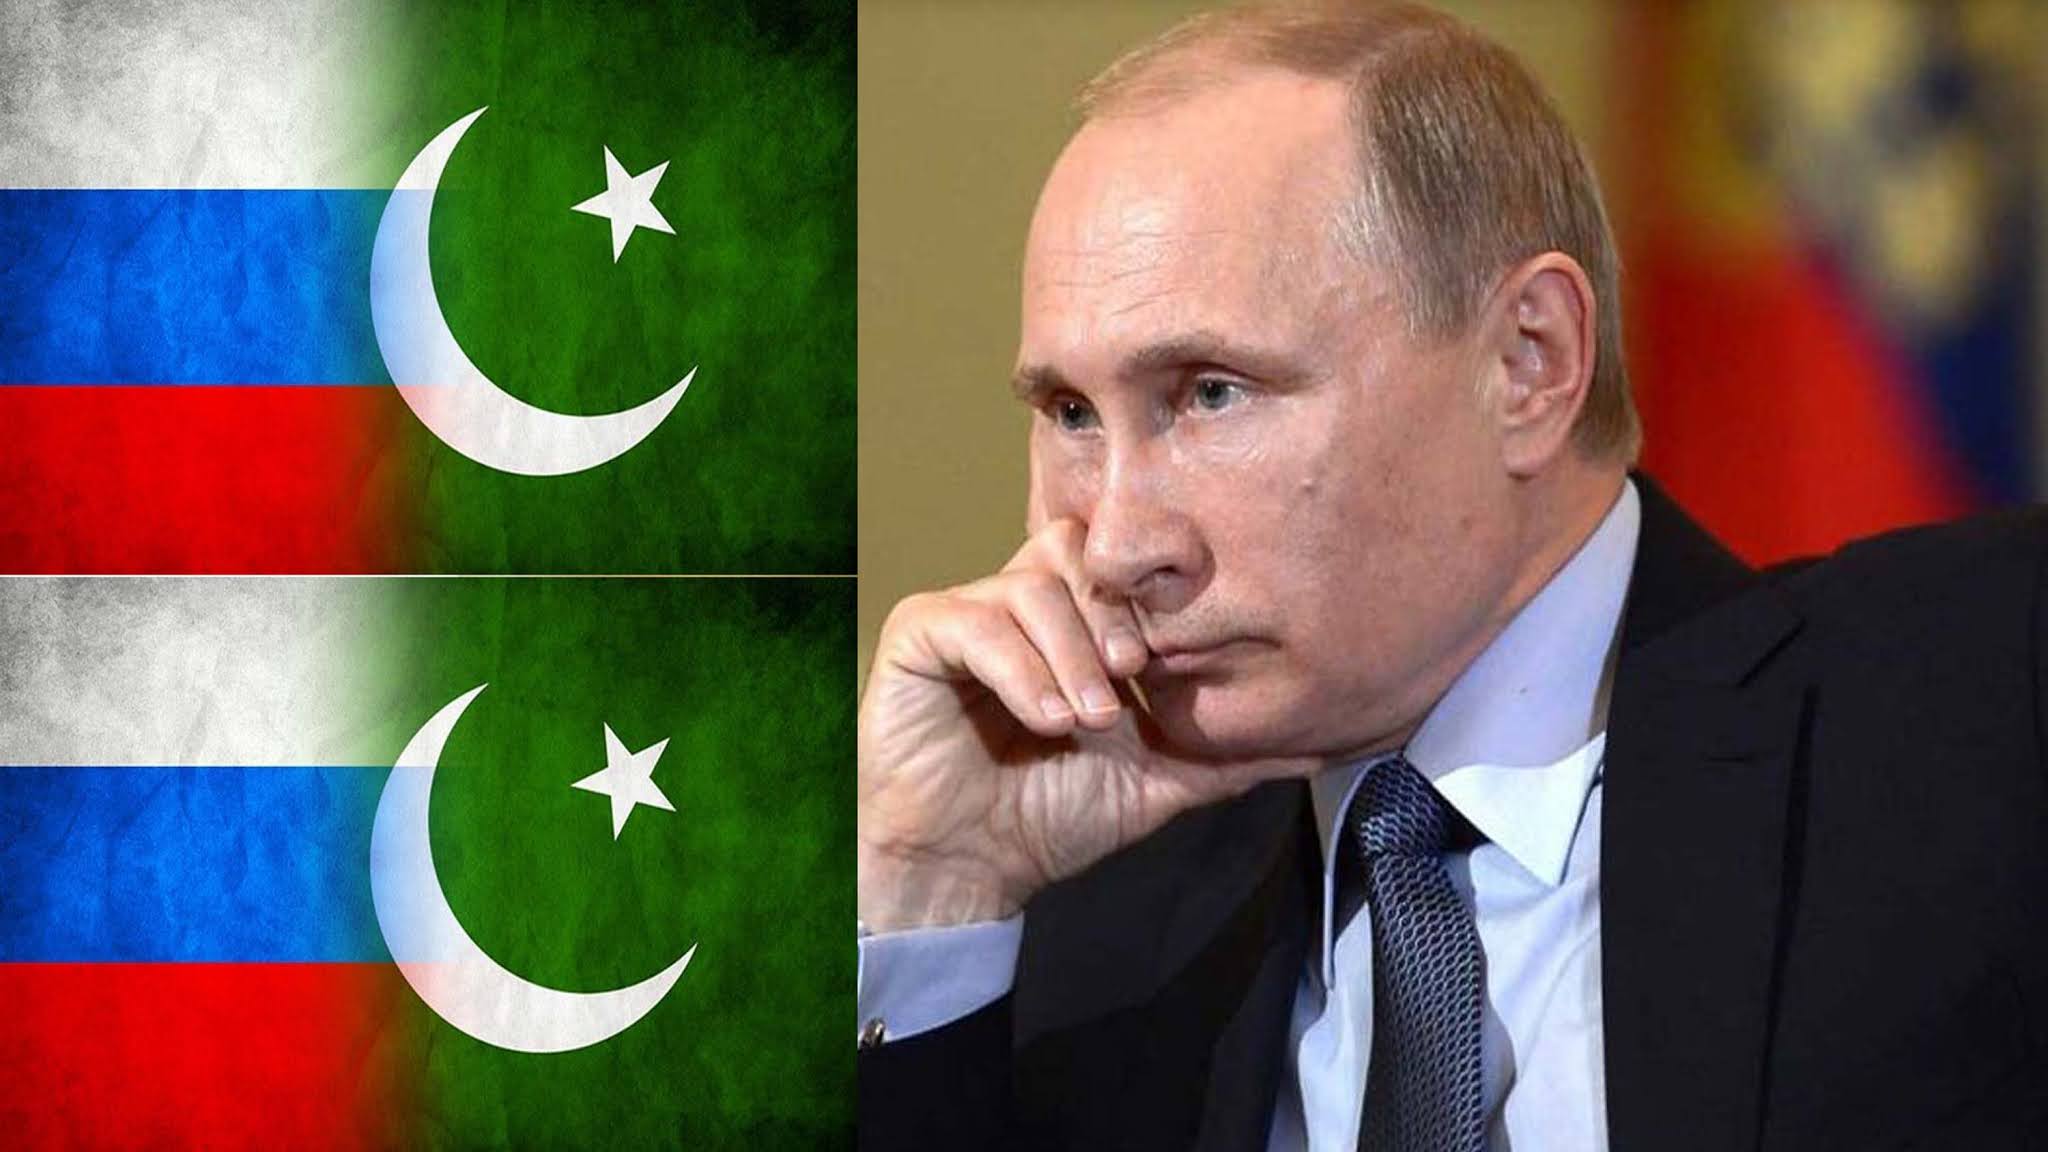 Pakistan and Russia are Shaping New Era of Strategic Relationship